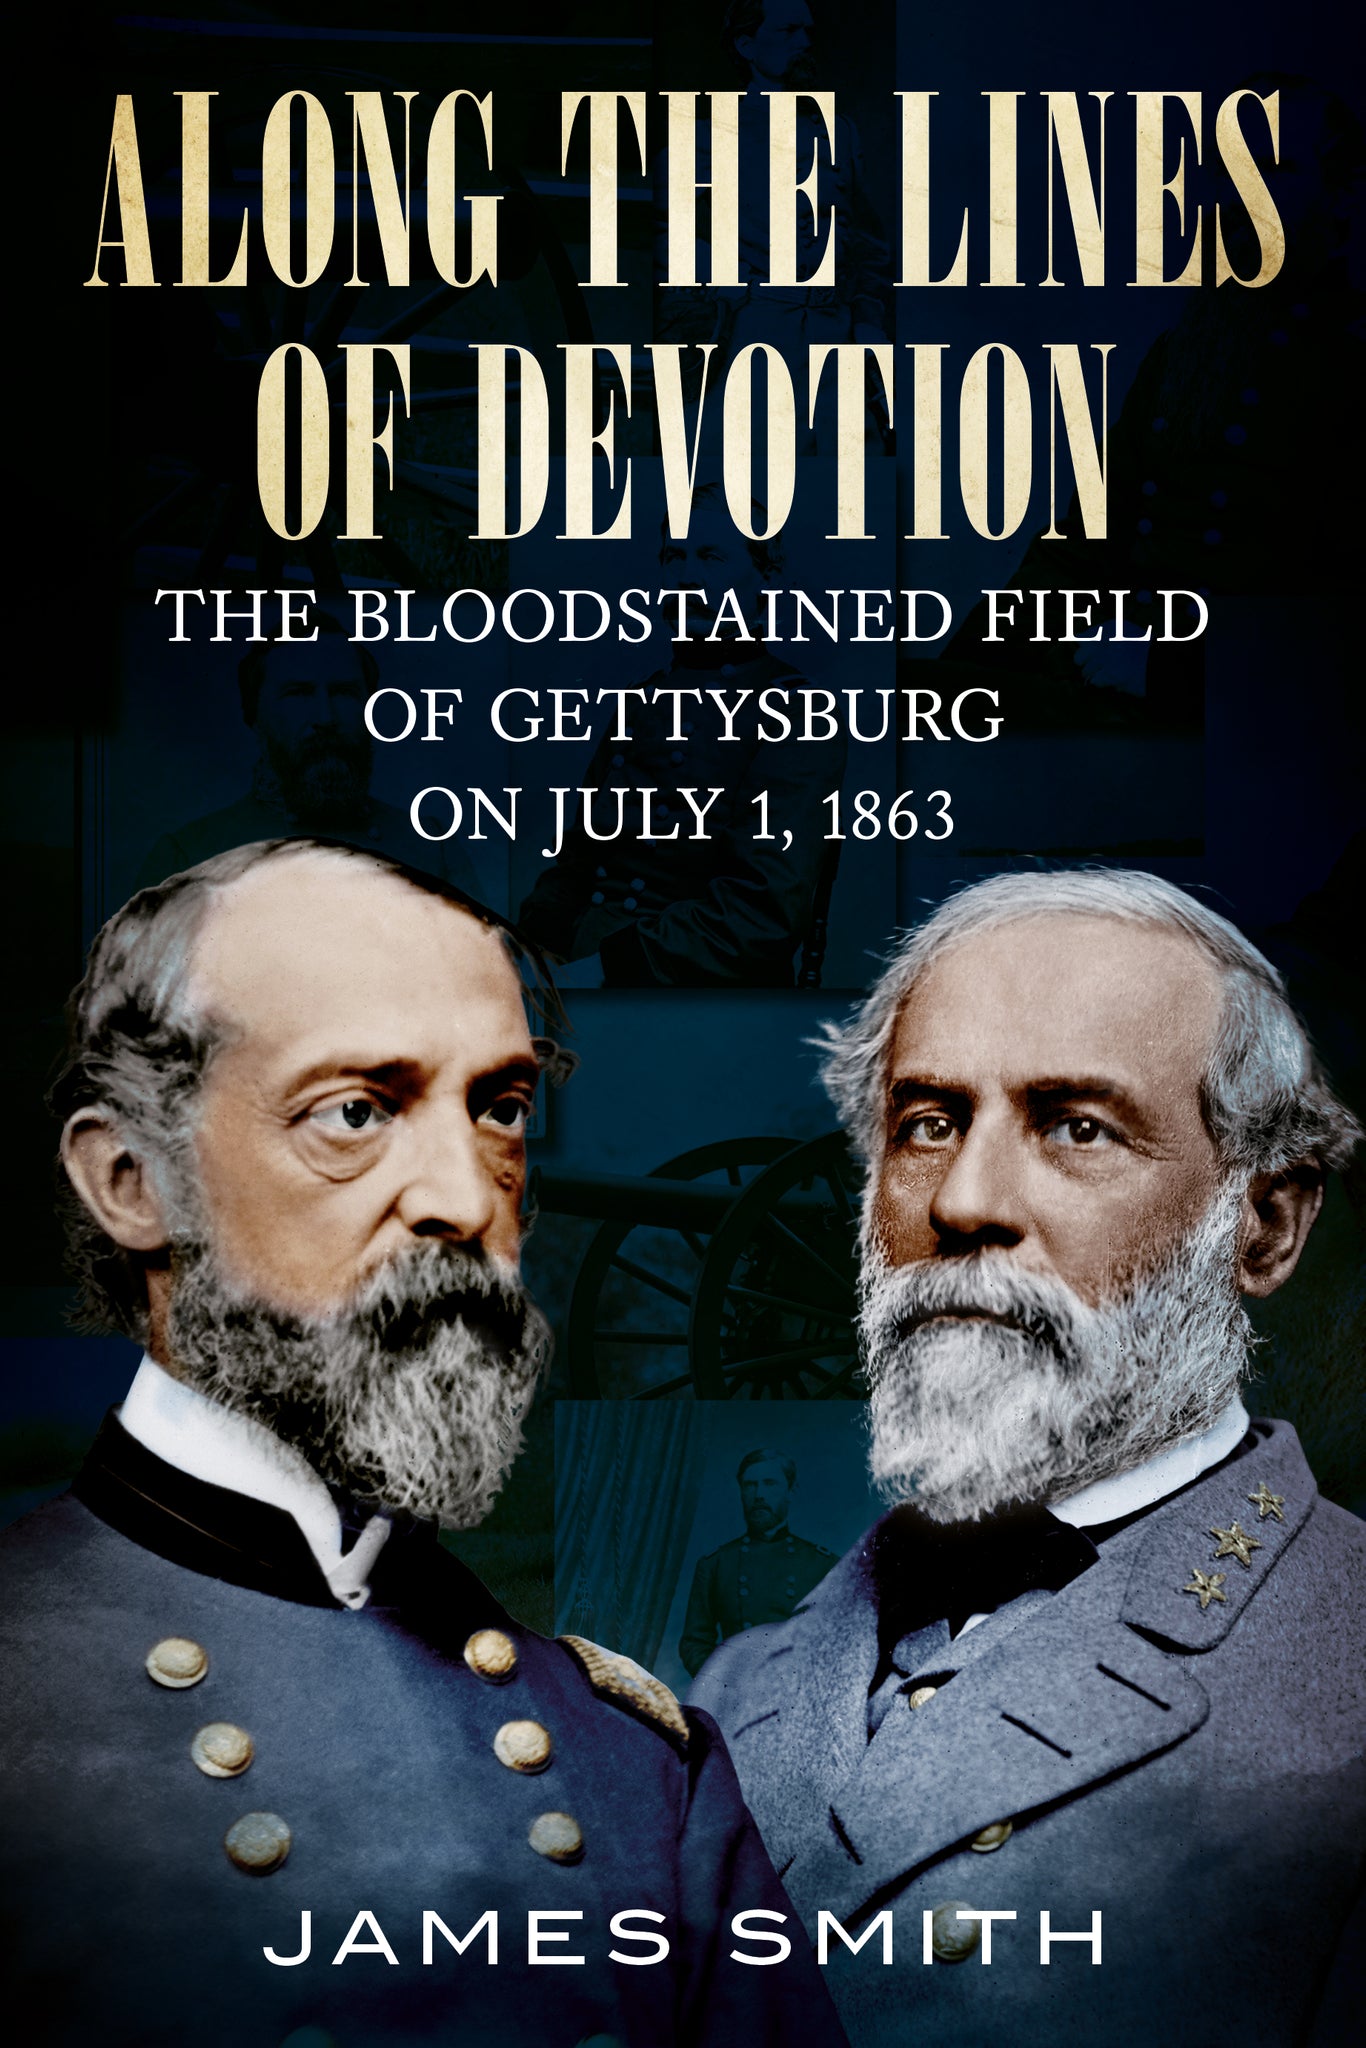 Along the Lines of Devotion The Bloodstained Field of Gettysburg on July 1, 1863 - available from America Through Time